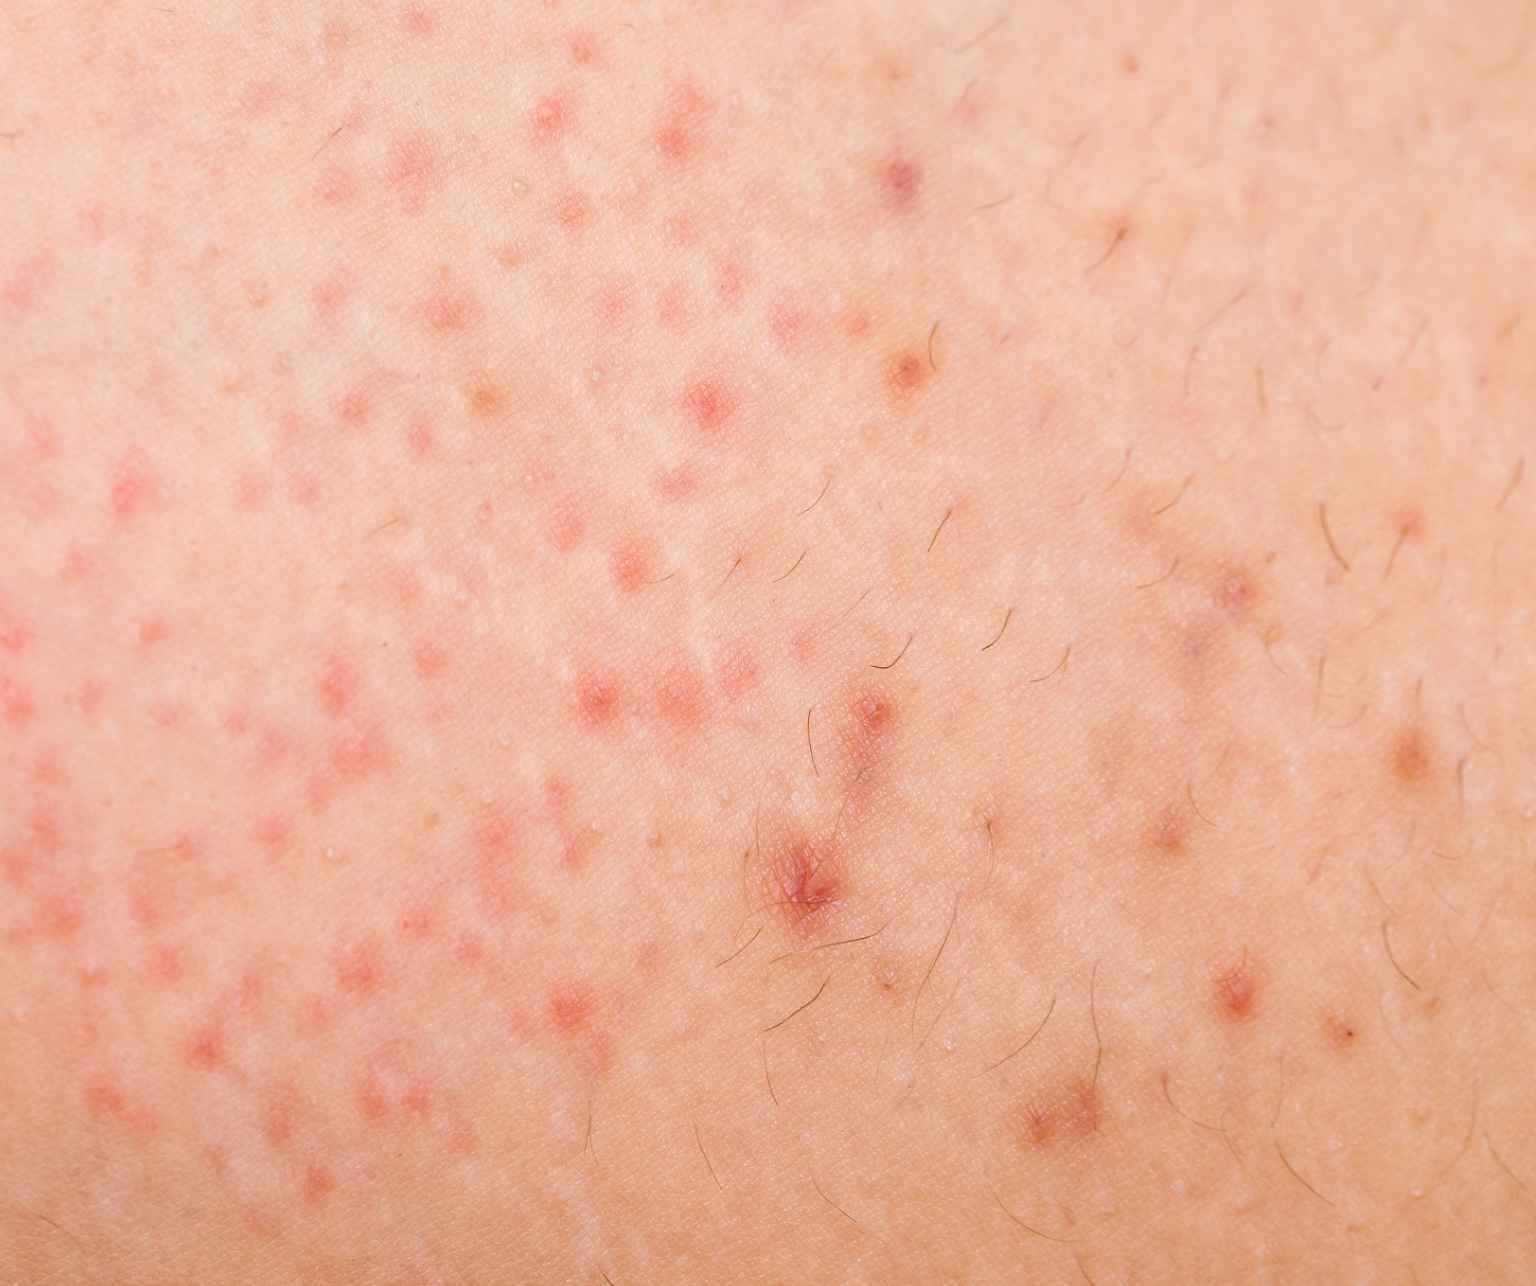 Folliculitis can be difficult to distinguish from acne, especially on the face. Consult your dermatologist if you think you have folliculitis to discuss what treatment options are best for you.